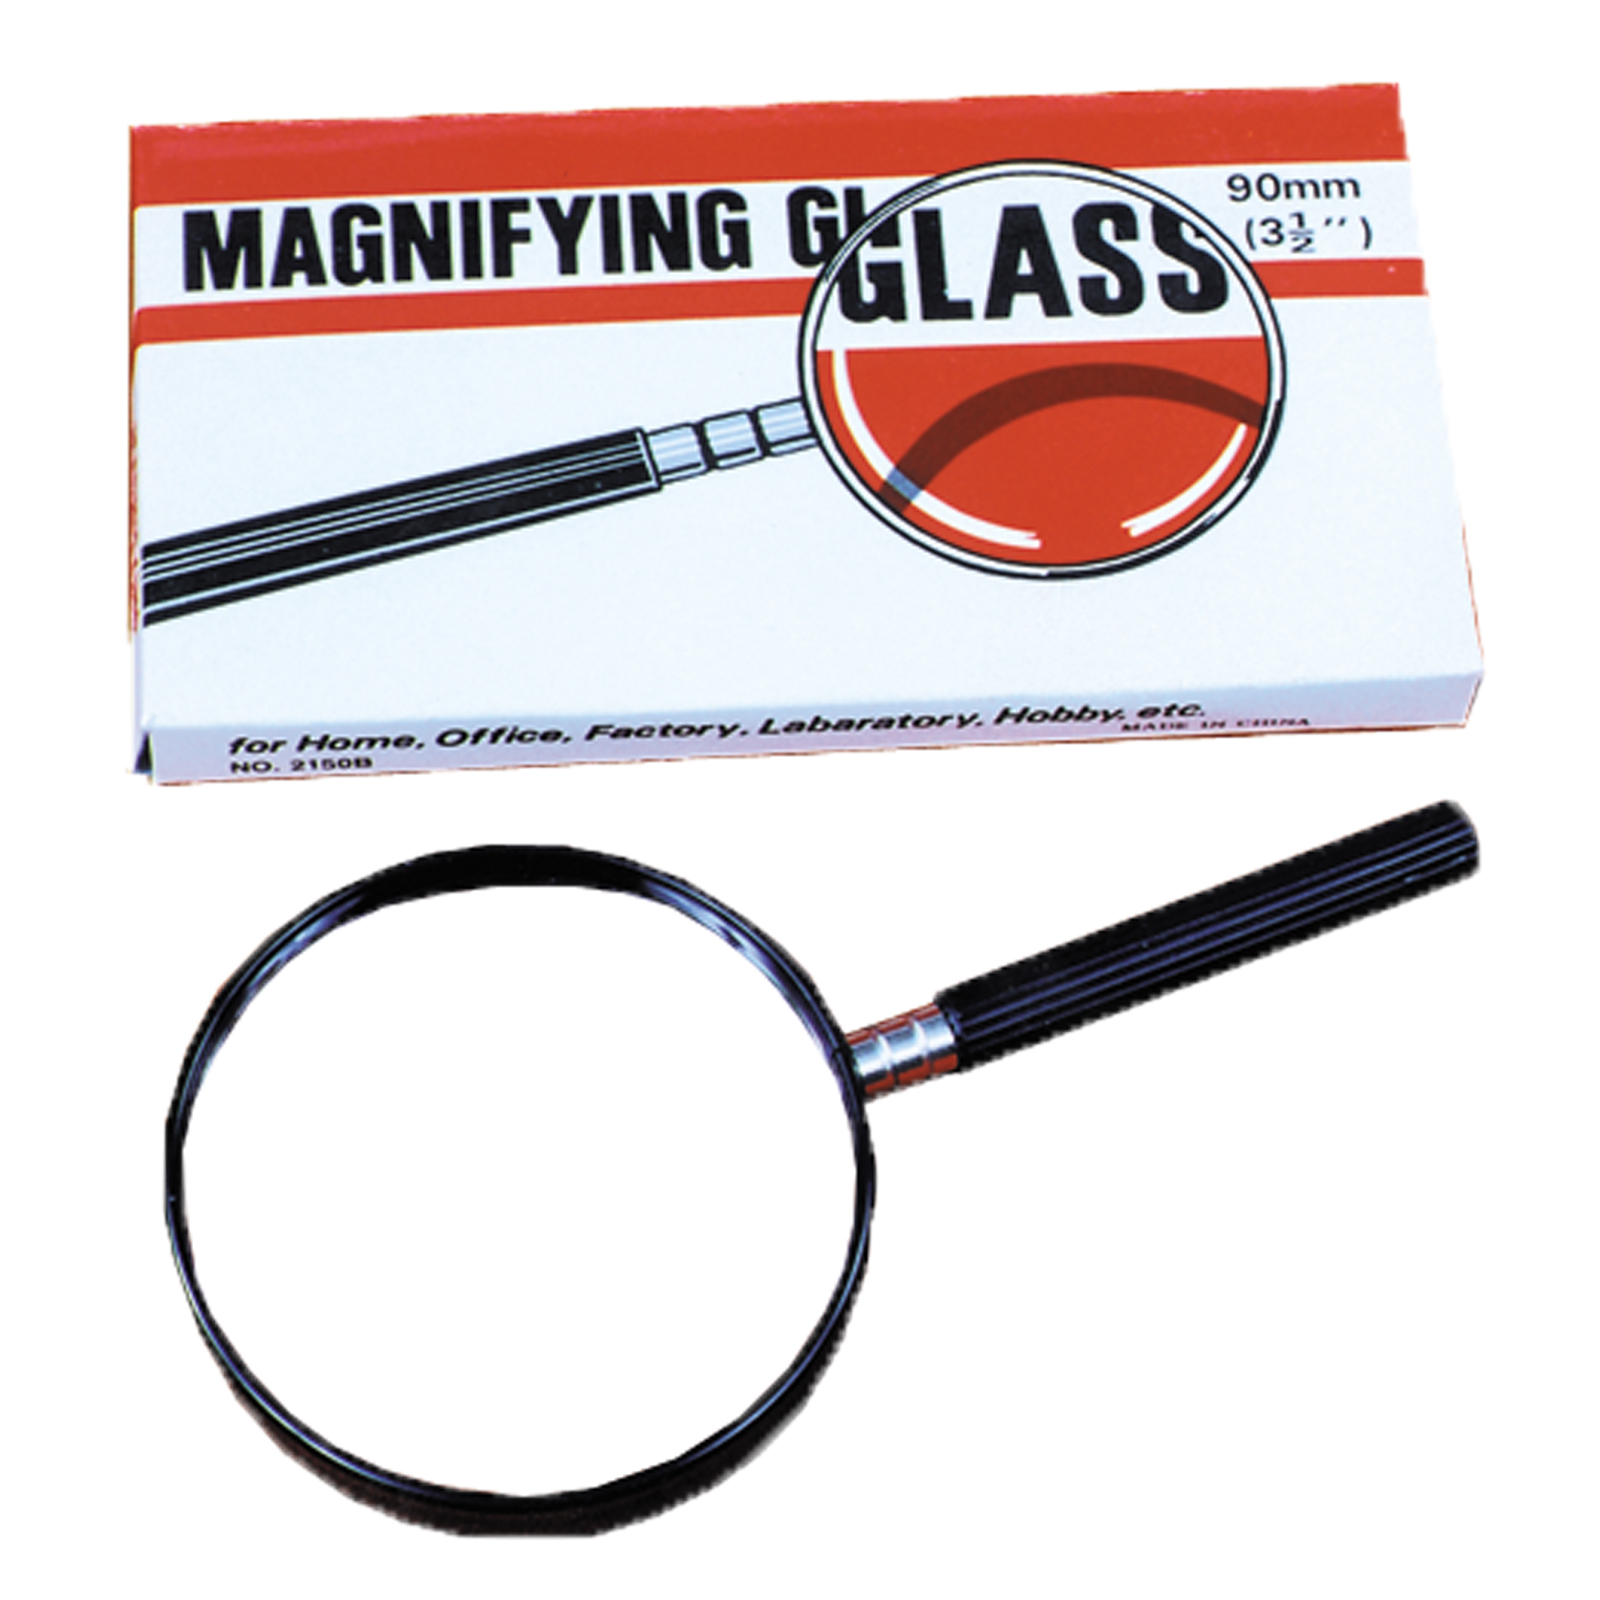 Magnifying Glass 2 1/2in 63mm Costume Accessory